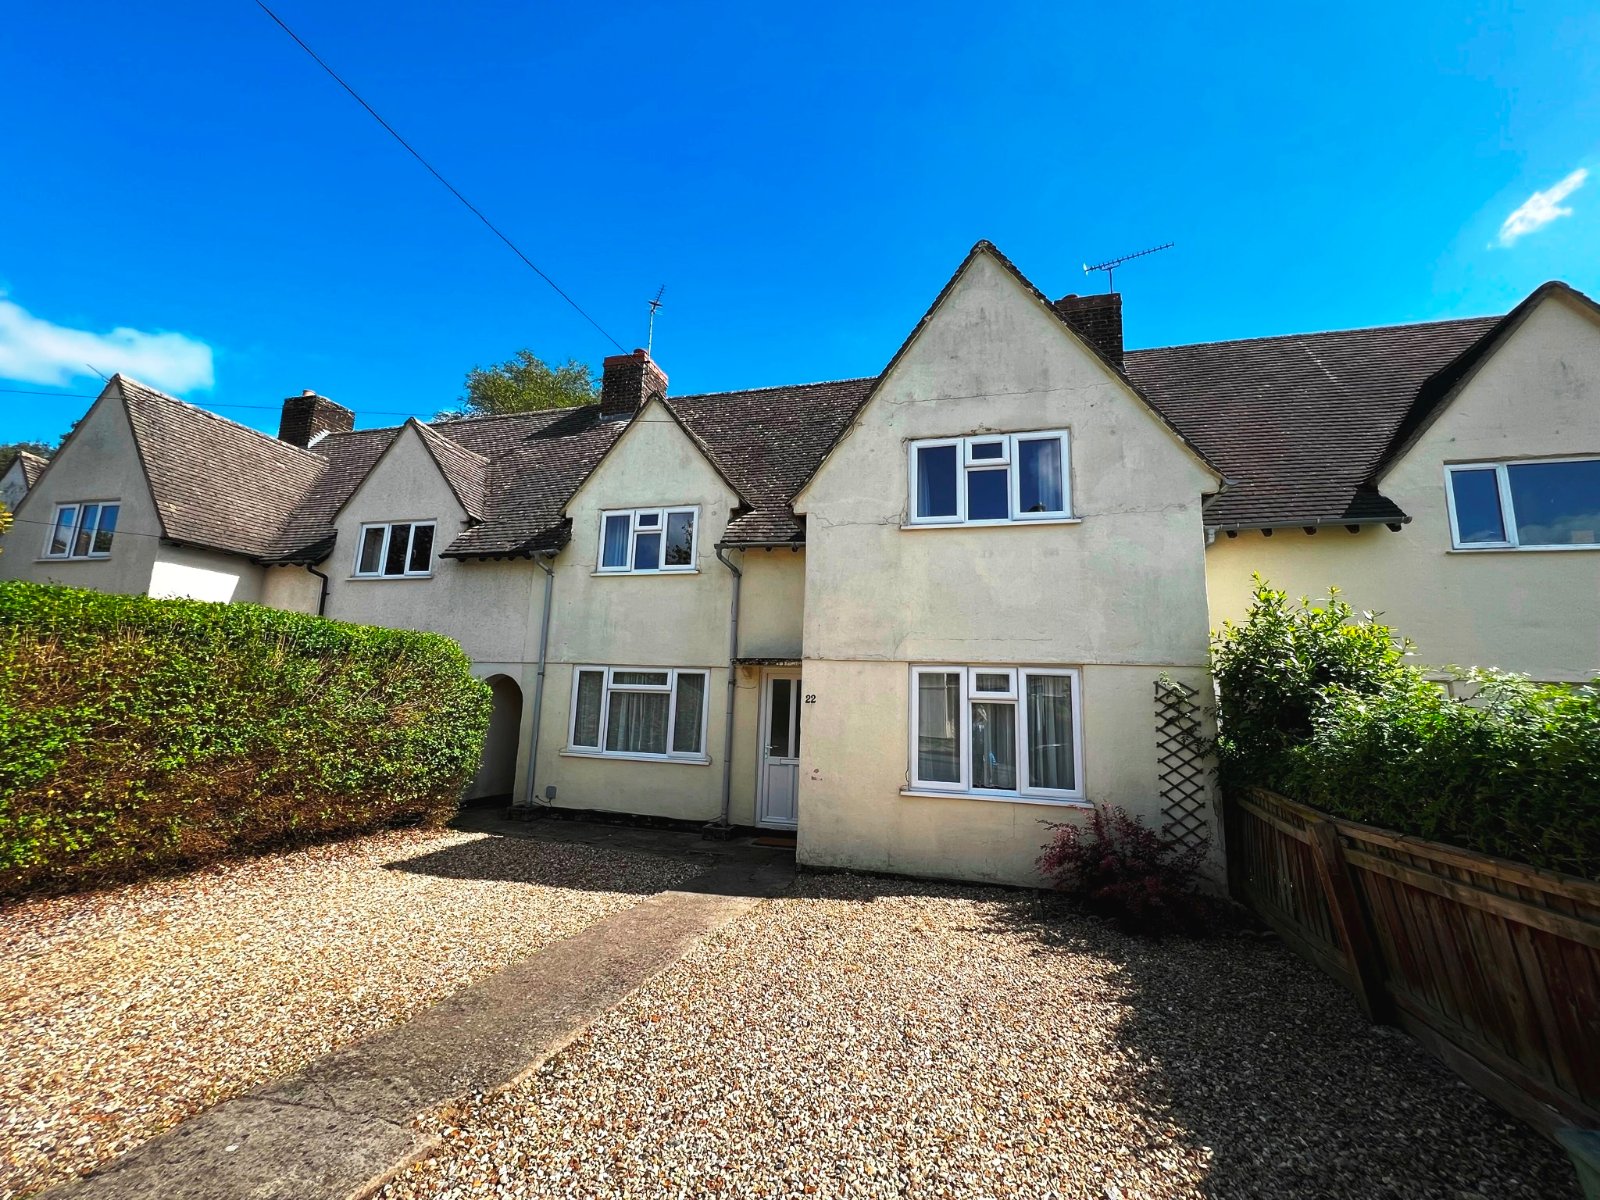 Lawrence Road, Cirencester, Gloucestershire, GL7